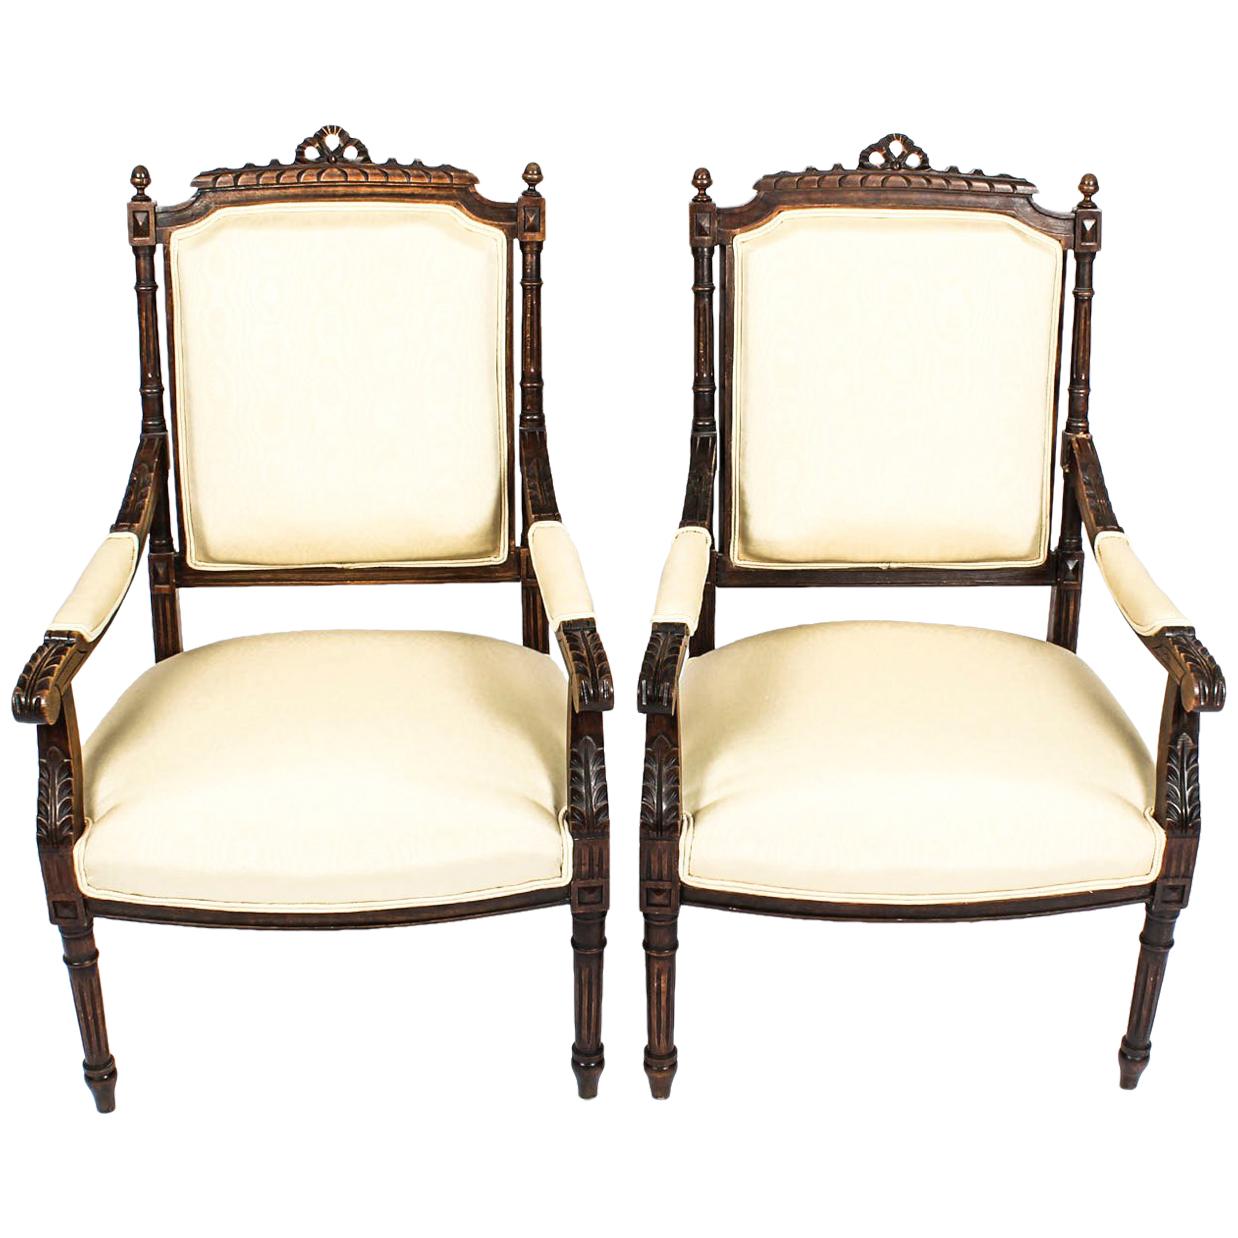 19th Century Pair of French Walnut Fauteuils Armchairs